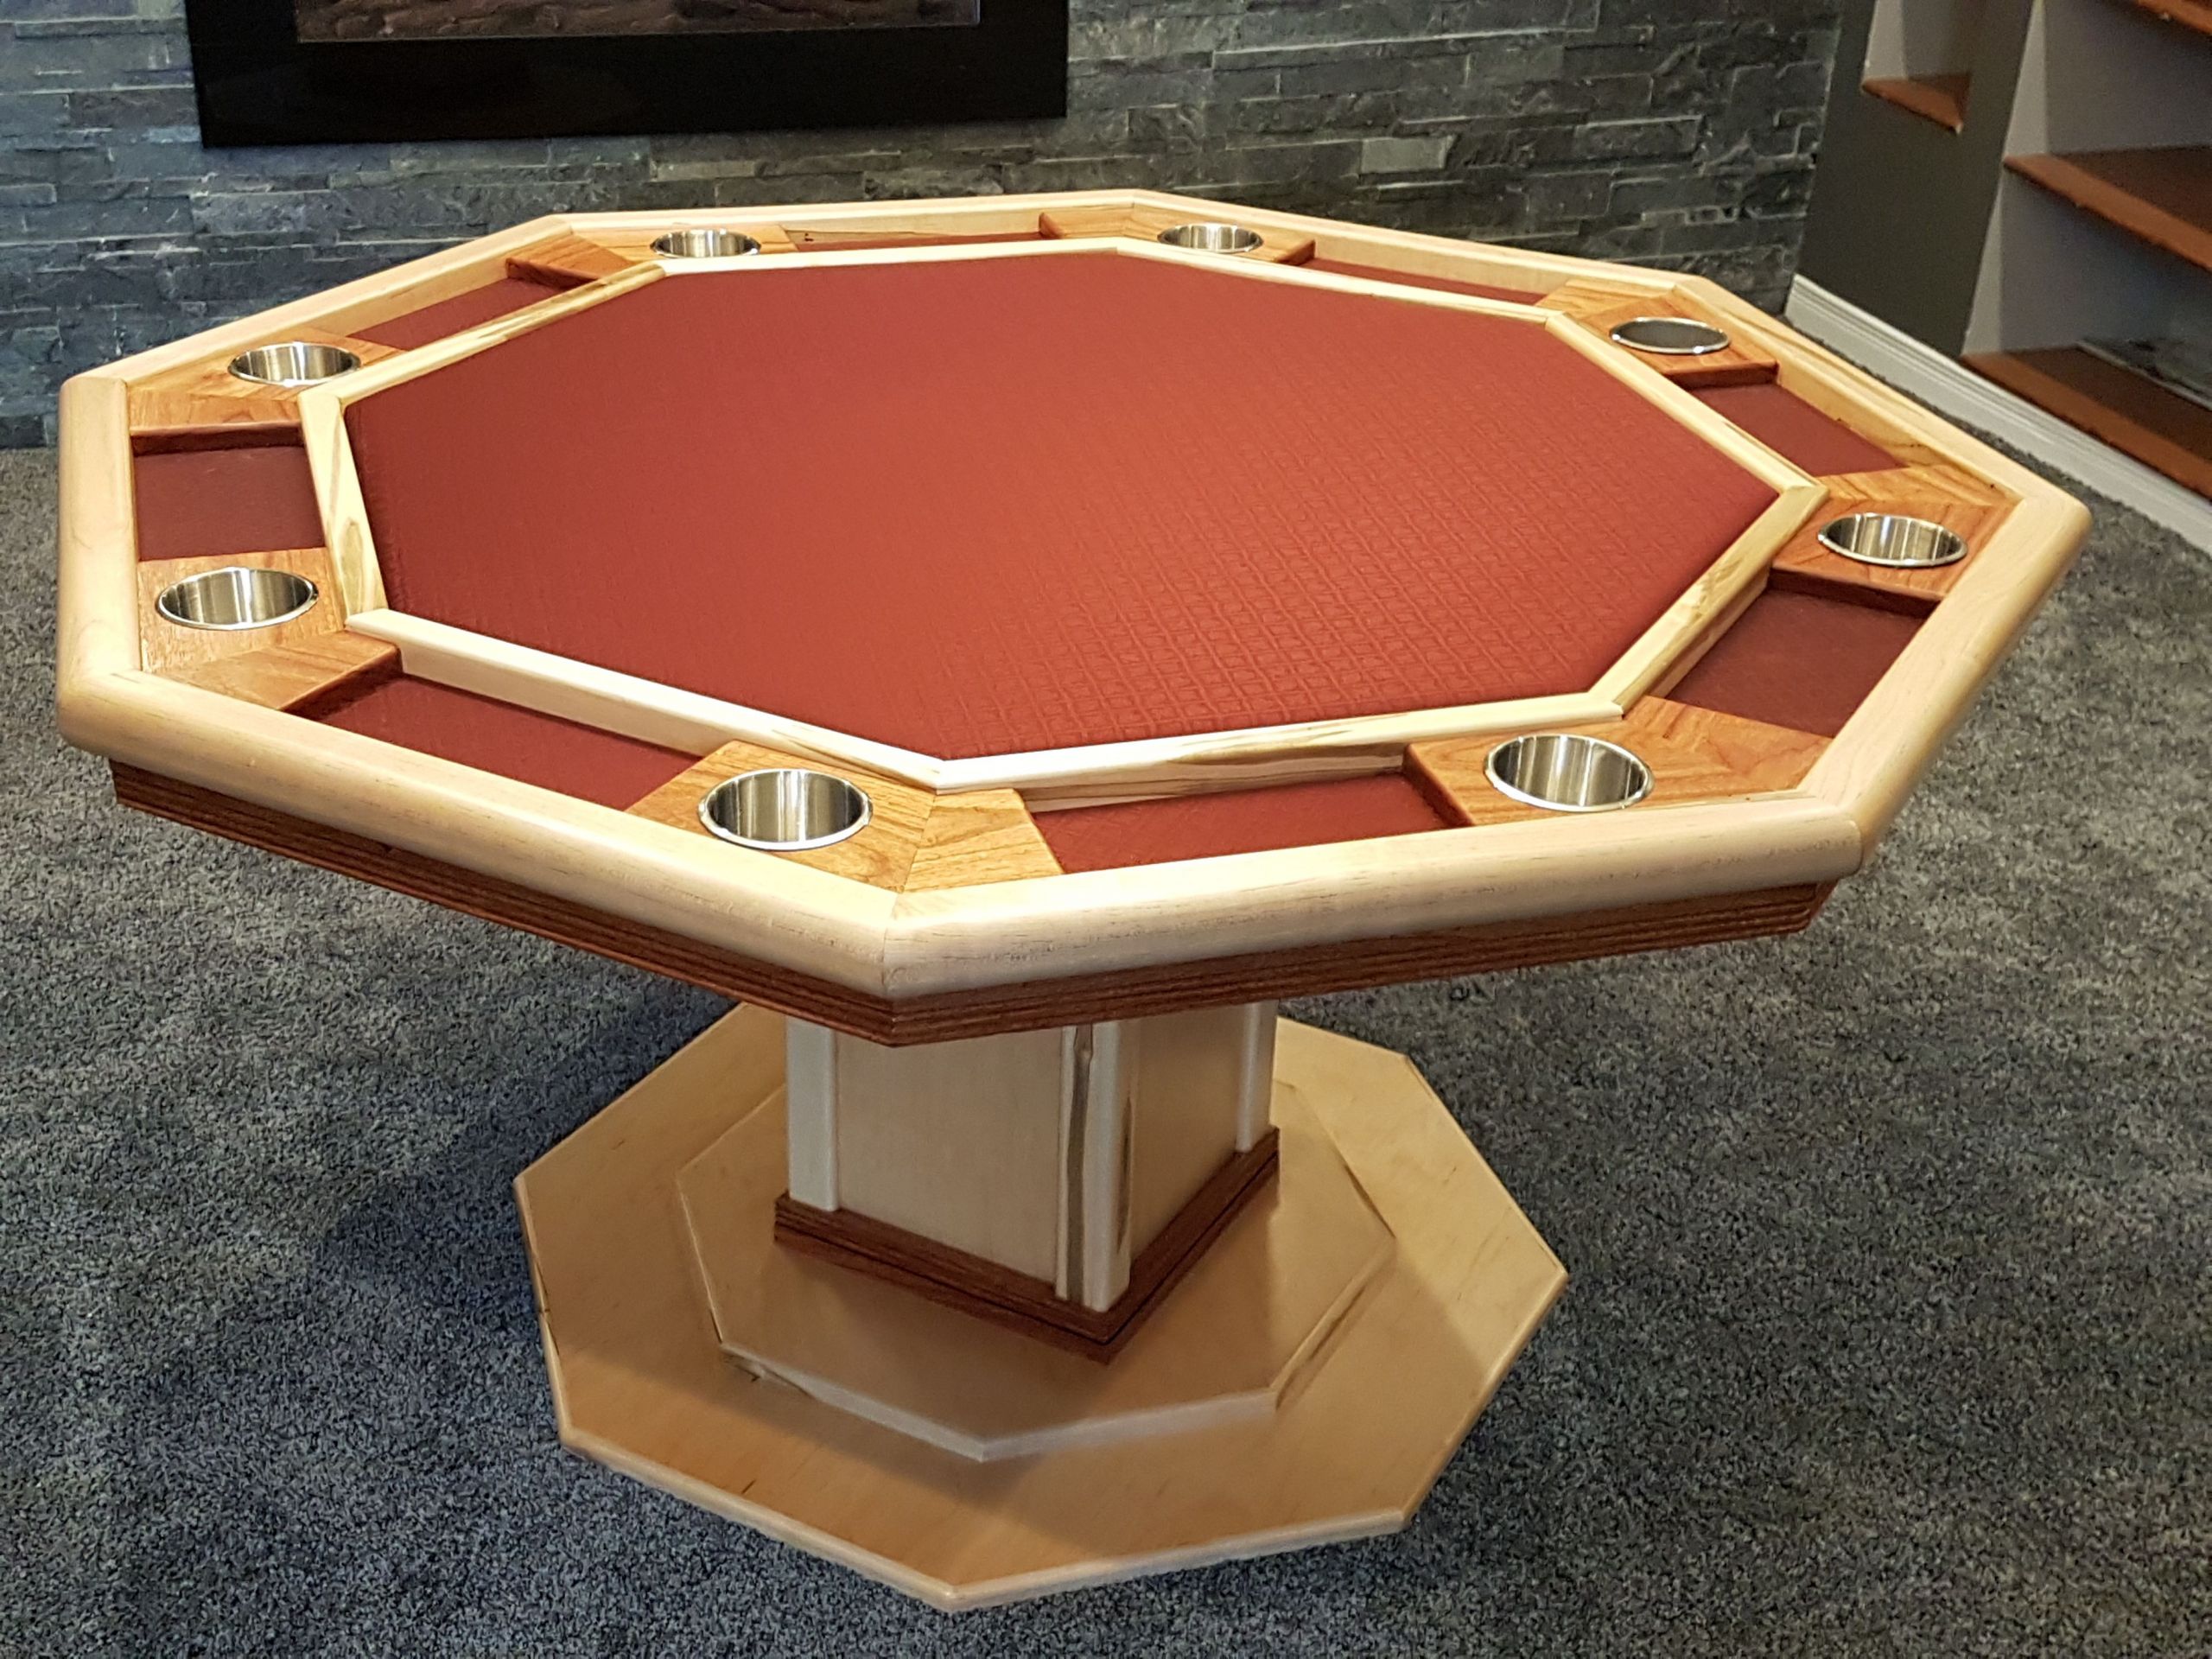 DIY Gaming Table Plans
 Octagonal table Ambrosia maple and Canary Wood